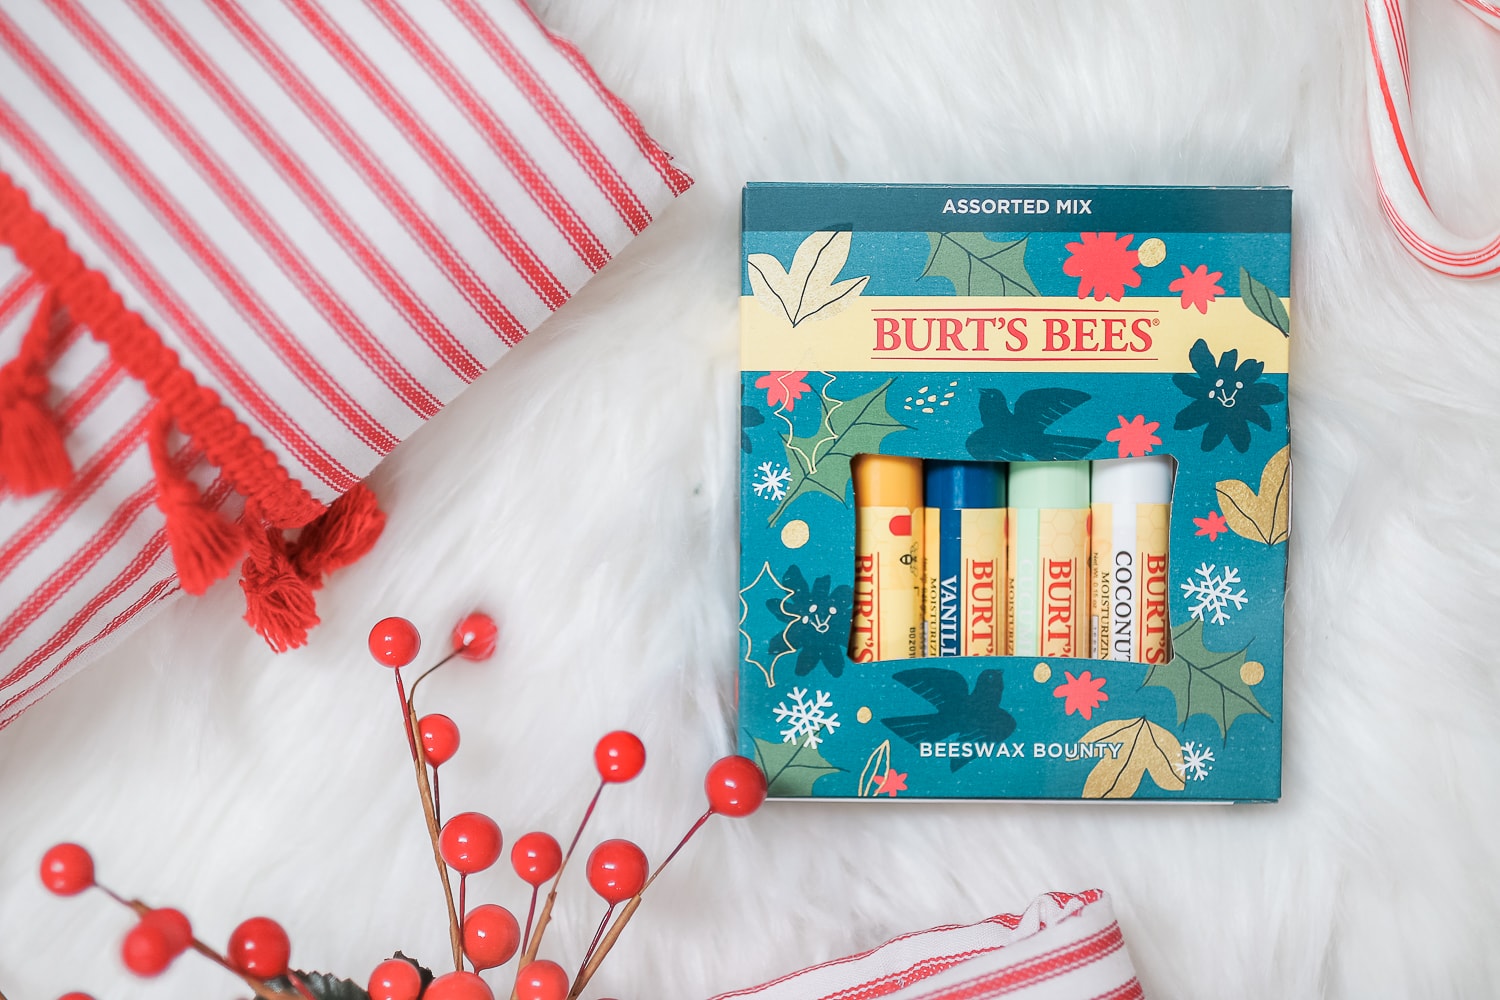 Burt's Bees Beeswax Bounty Assorted Mix featured by blogger Stephanie Ziajka in her roundup of the best stocking stuffers for guys on Diary of a Debutante